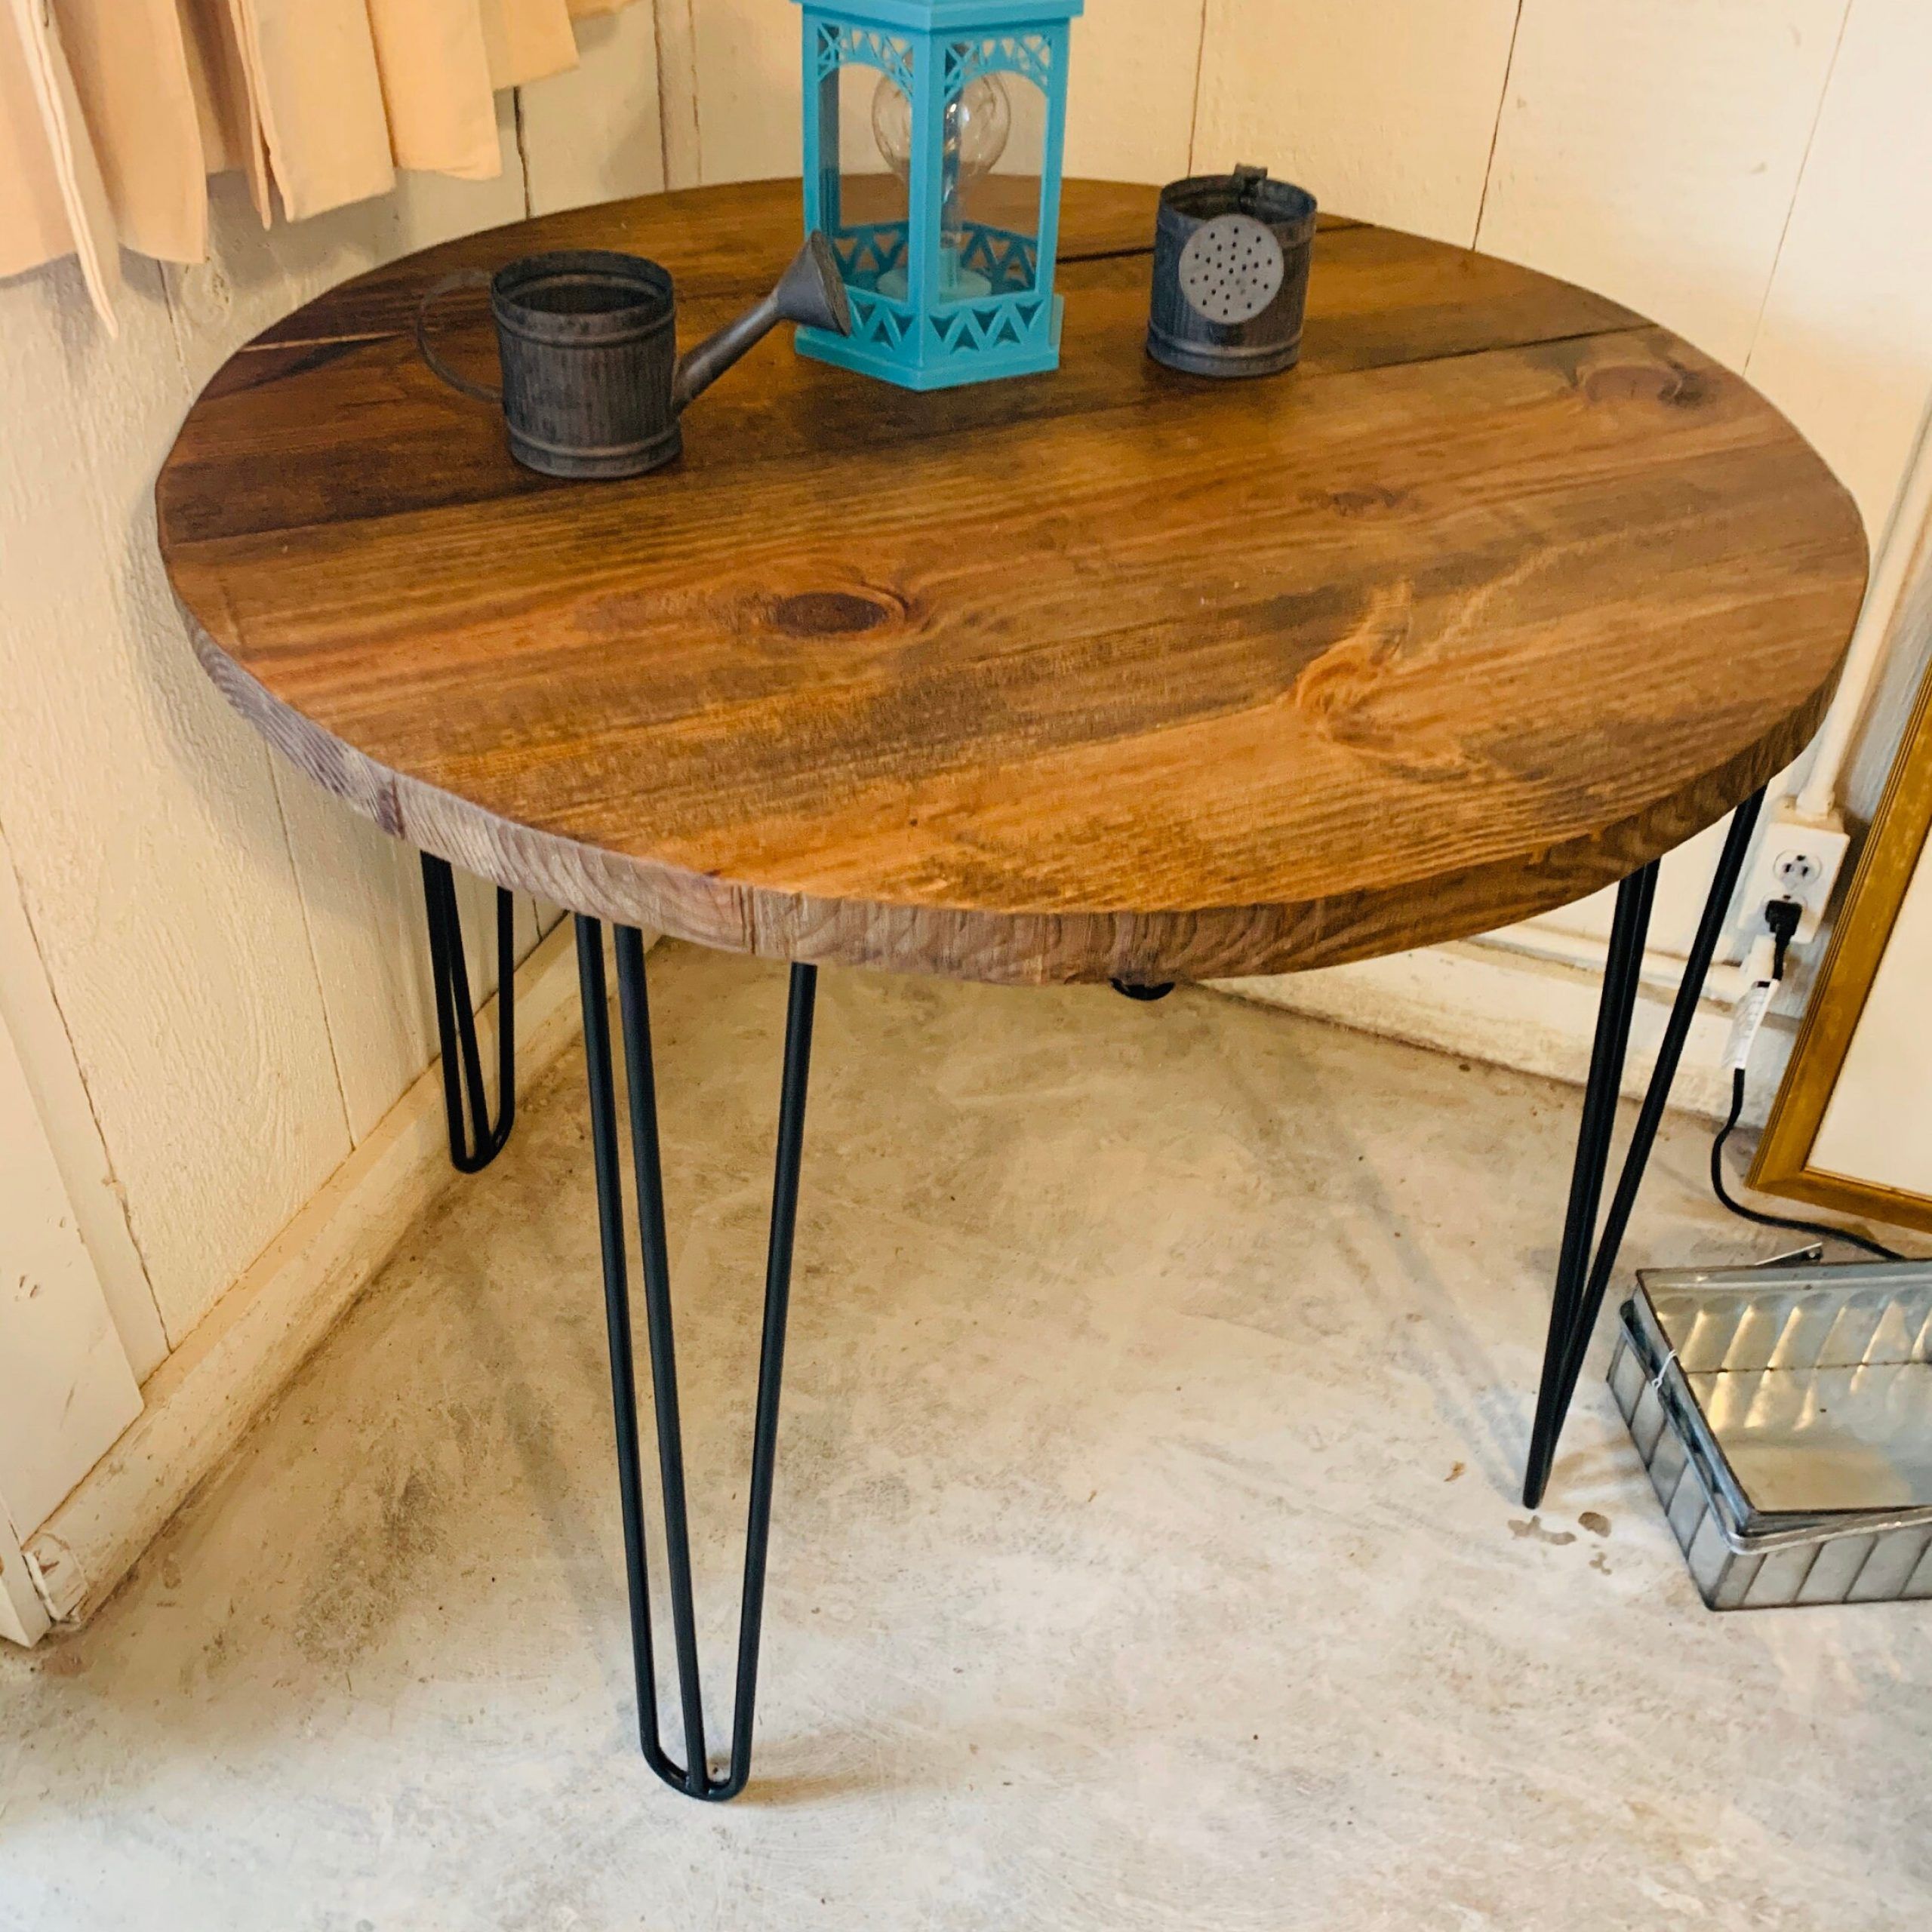 Small Farmhouse Nook Dining Table, Industrial Style Inside Latest Round Hairpin Leg Dining Tables (View 5 of 15)